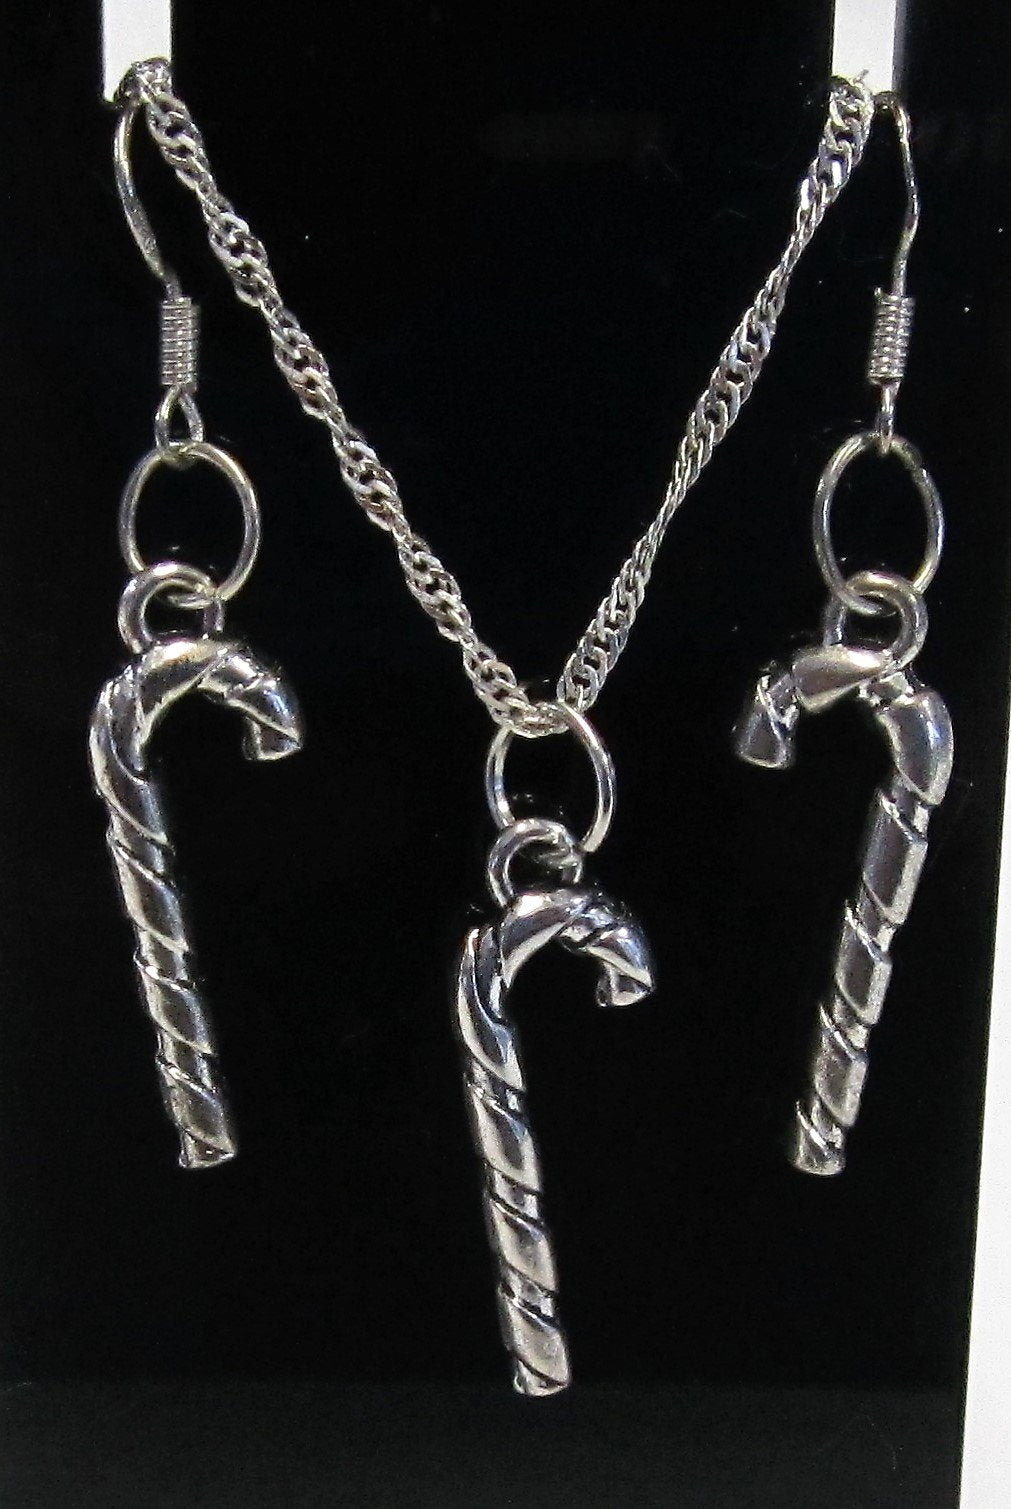 Handcrafted Candy cane earring and necklace set on 925 sterling silver hooks and chain